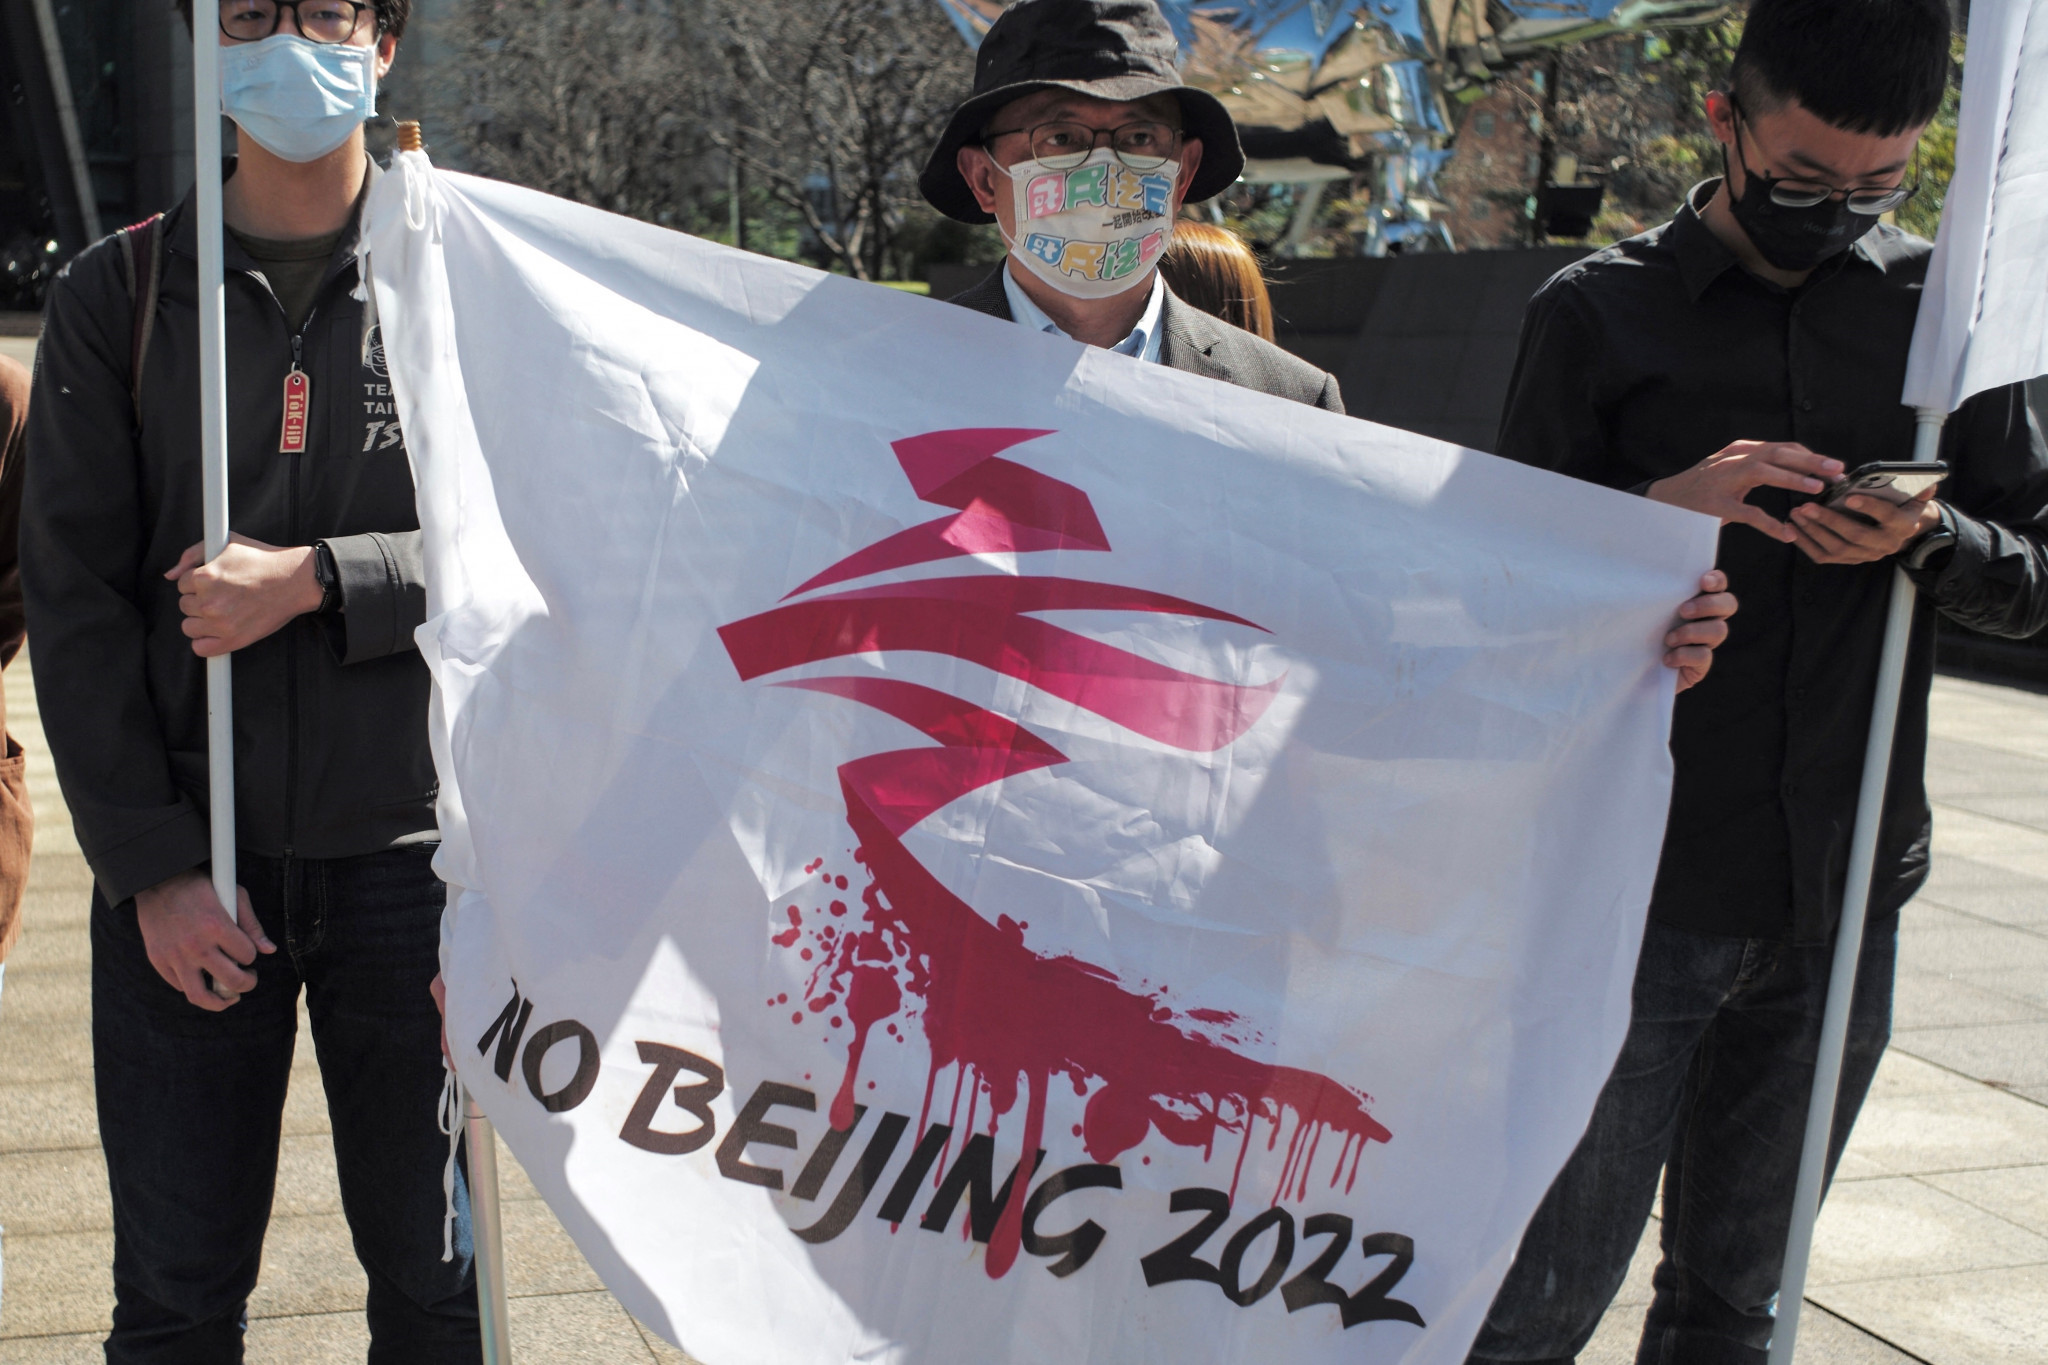 An activist holds a banner to protest against the Winter Olympics during a demonstration outside the Bank of China in Taipei last week ©Getty Images